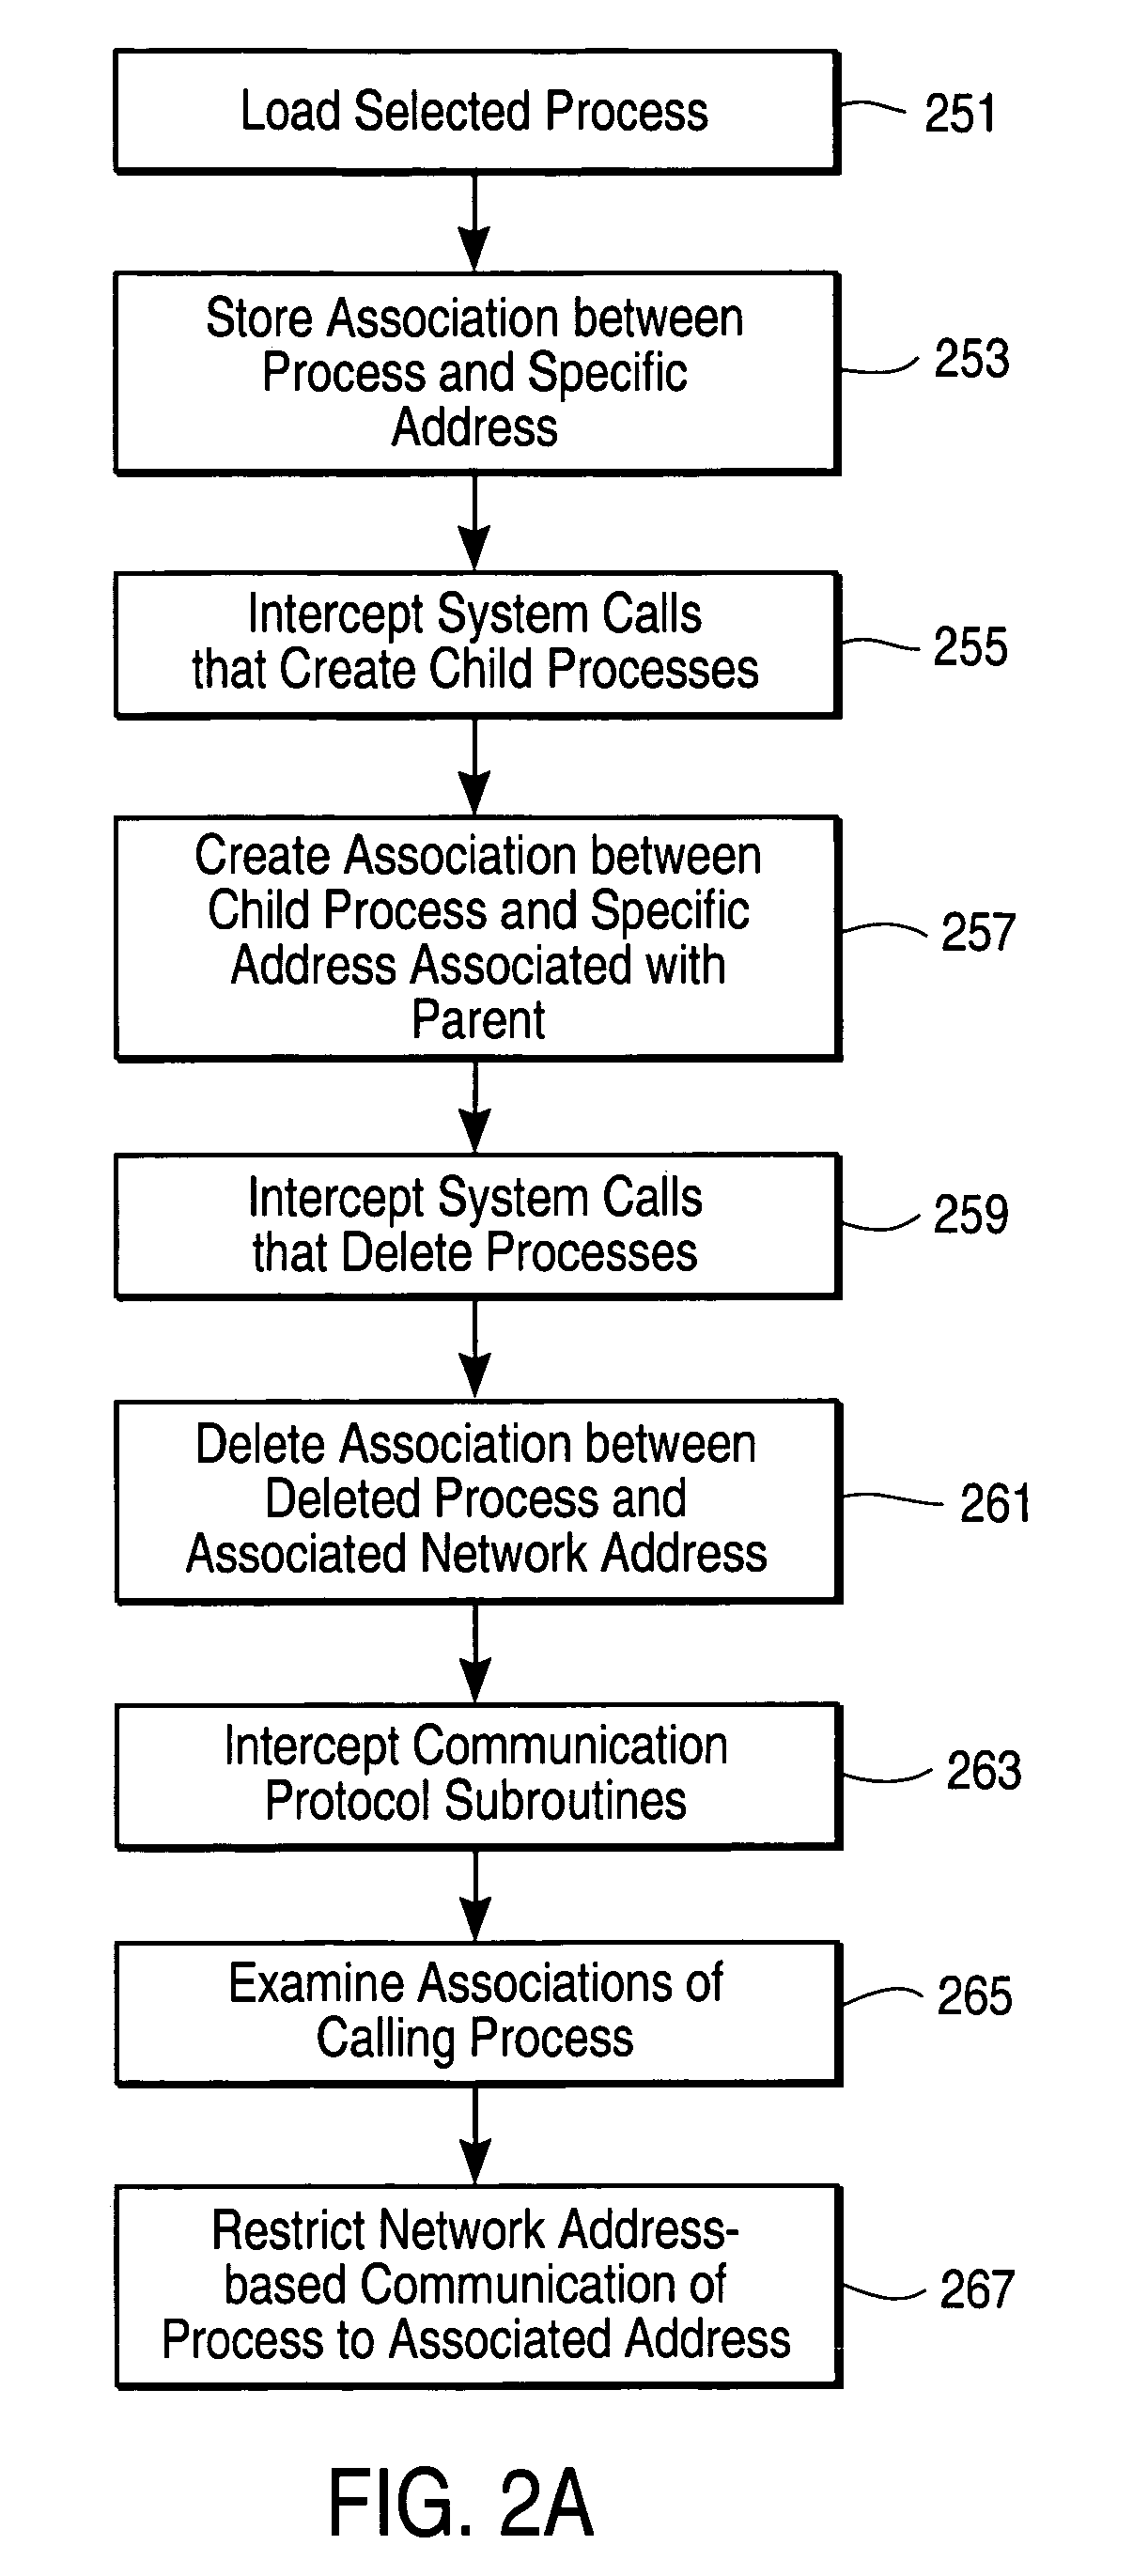 Restricting communication of selected processes to a set of specific network addresses